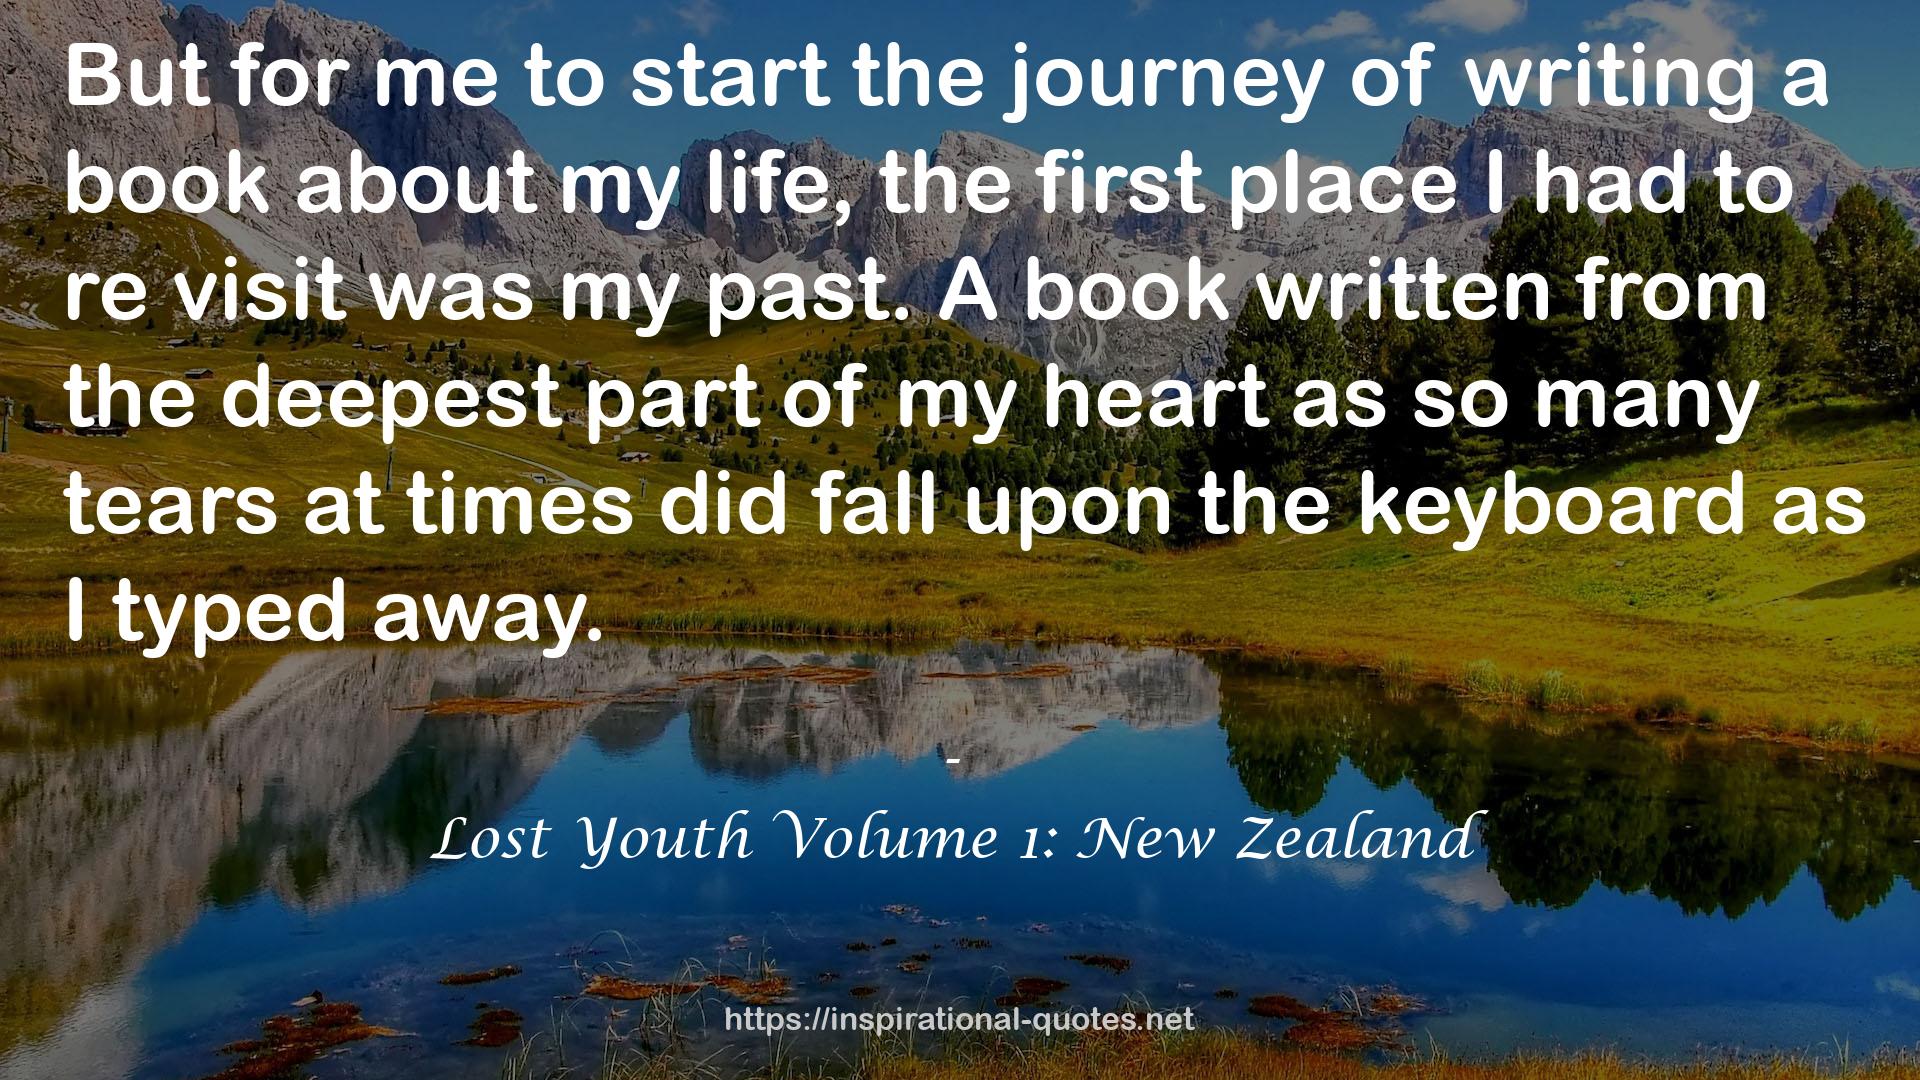 Lost Youth Volume 1: New Zealand QUOTES